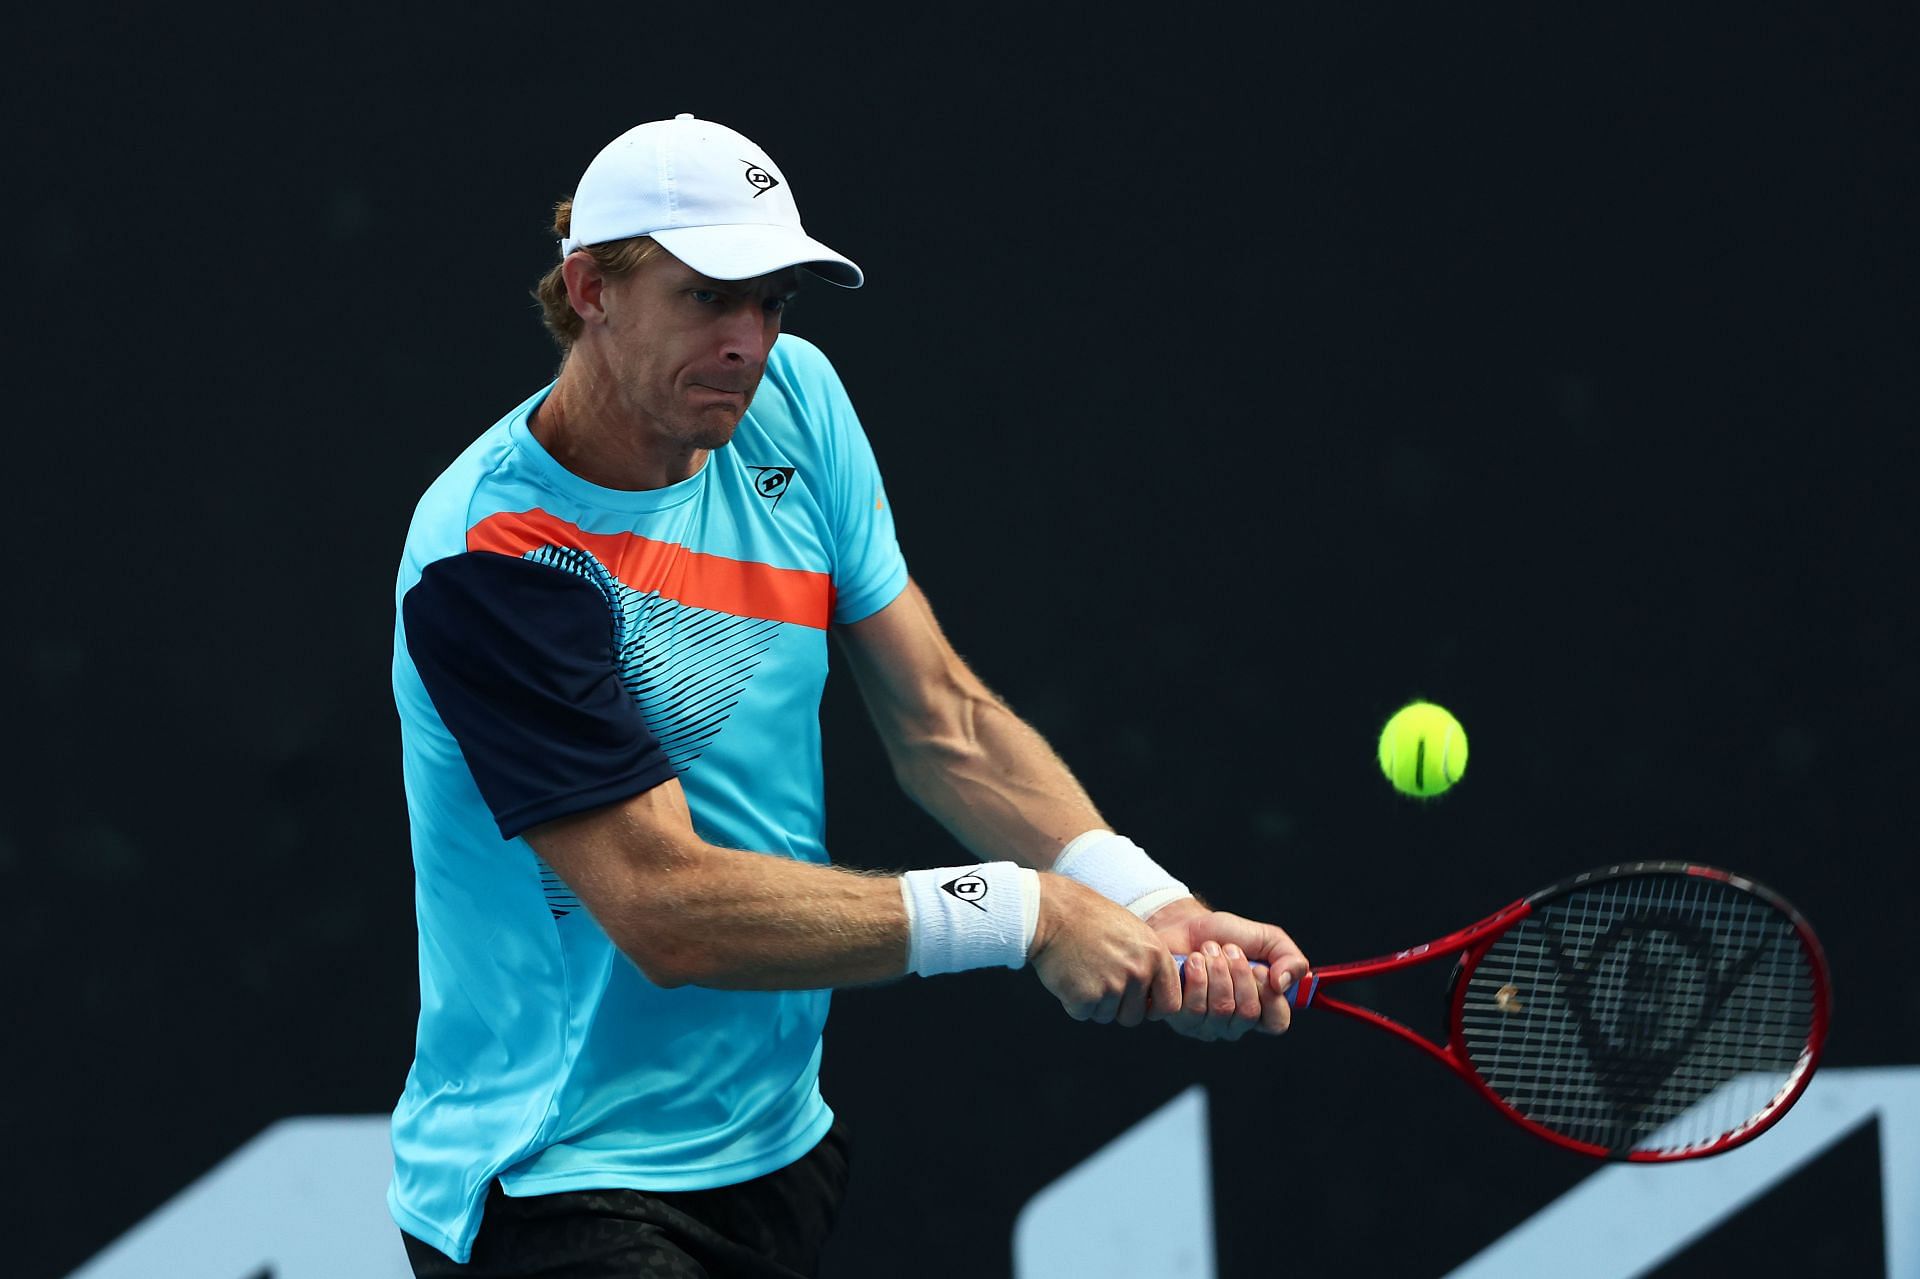 Kevin Anderson thanked his team, his wife and sponsors for their support throughout his career